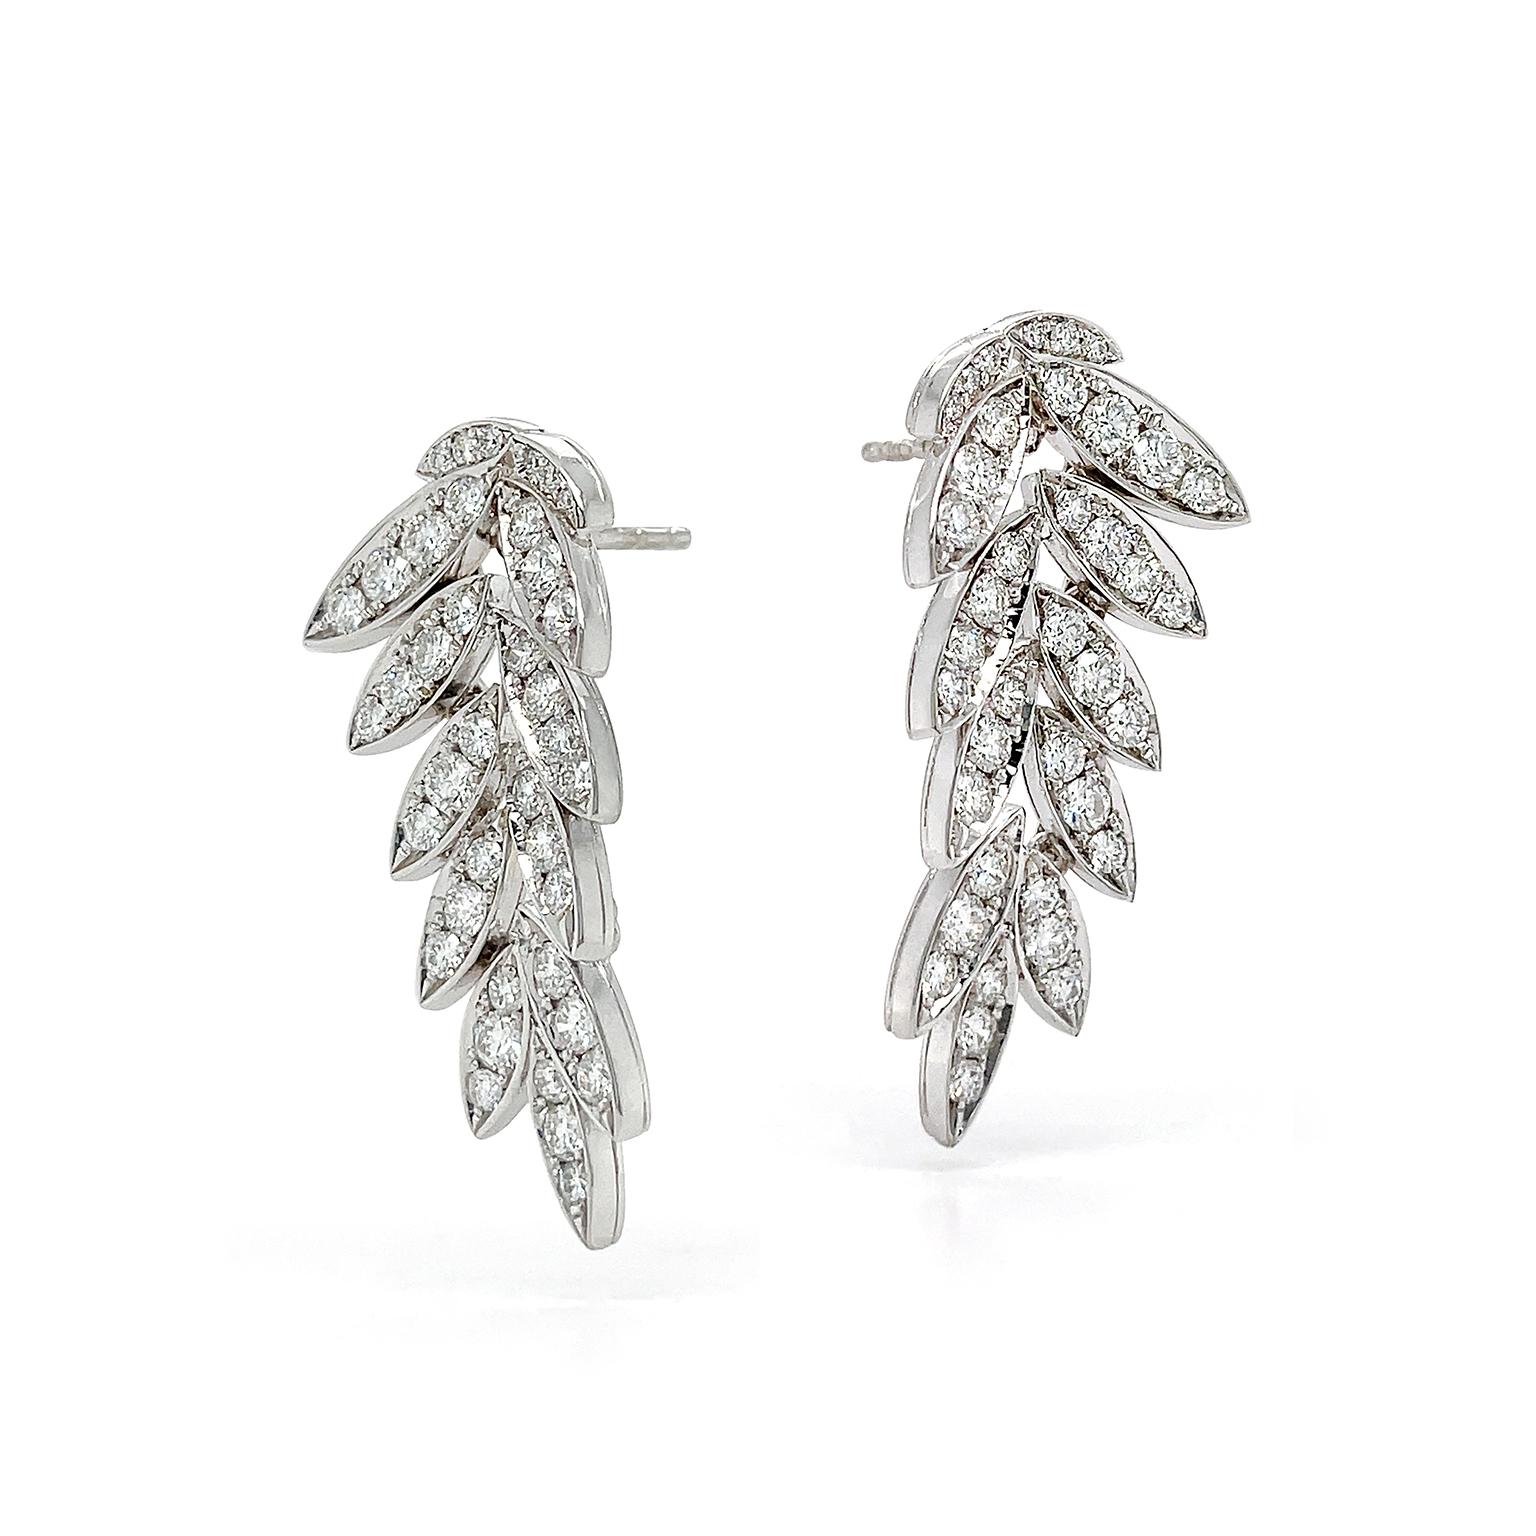 These earrings turn diamonds into greenery. Dozens of jewels are faceted into round brilliant-cut diamonds for optimal brightness. They’re pavé set into groups of three or four on 18kt white gold. Together, they create scintillating leaves. The